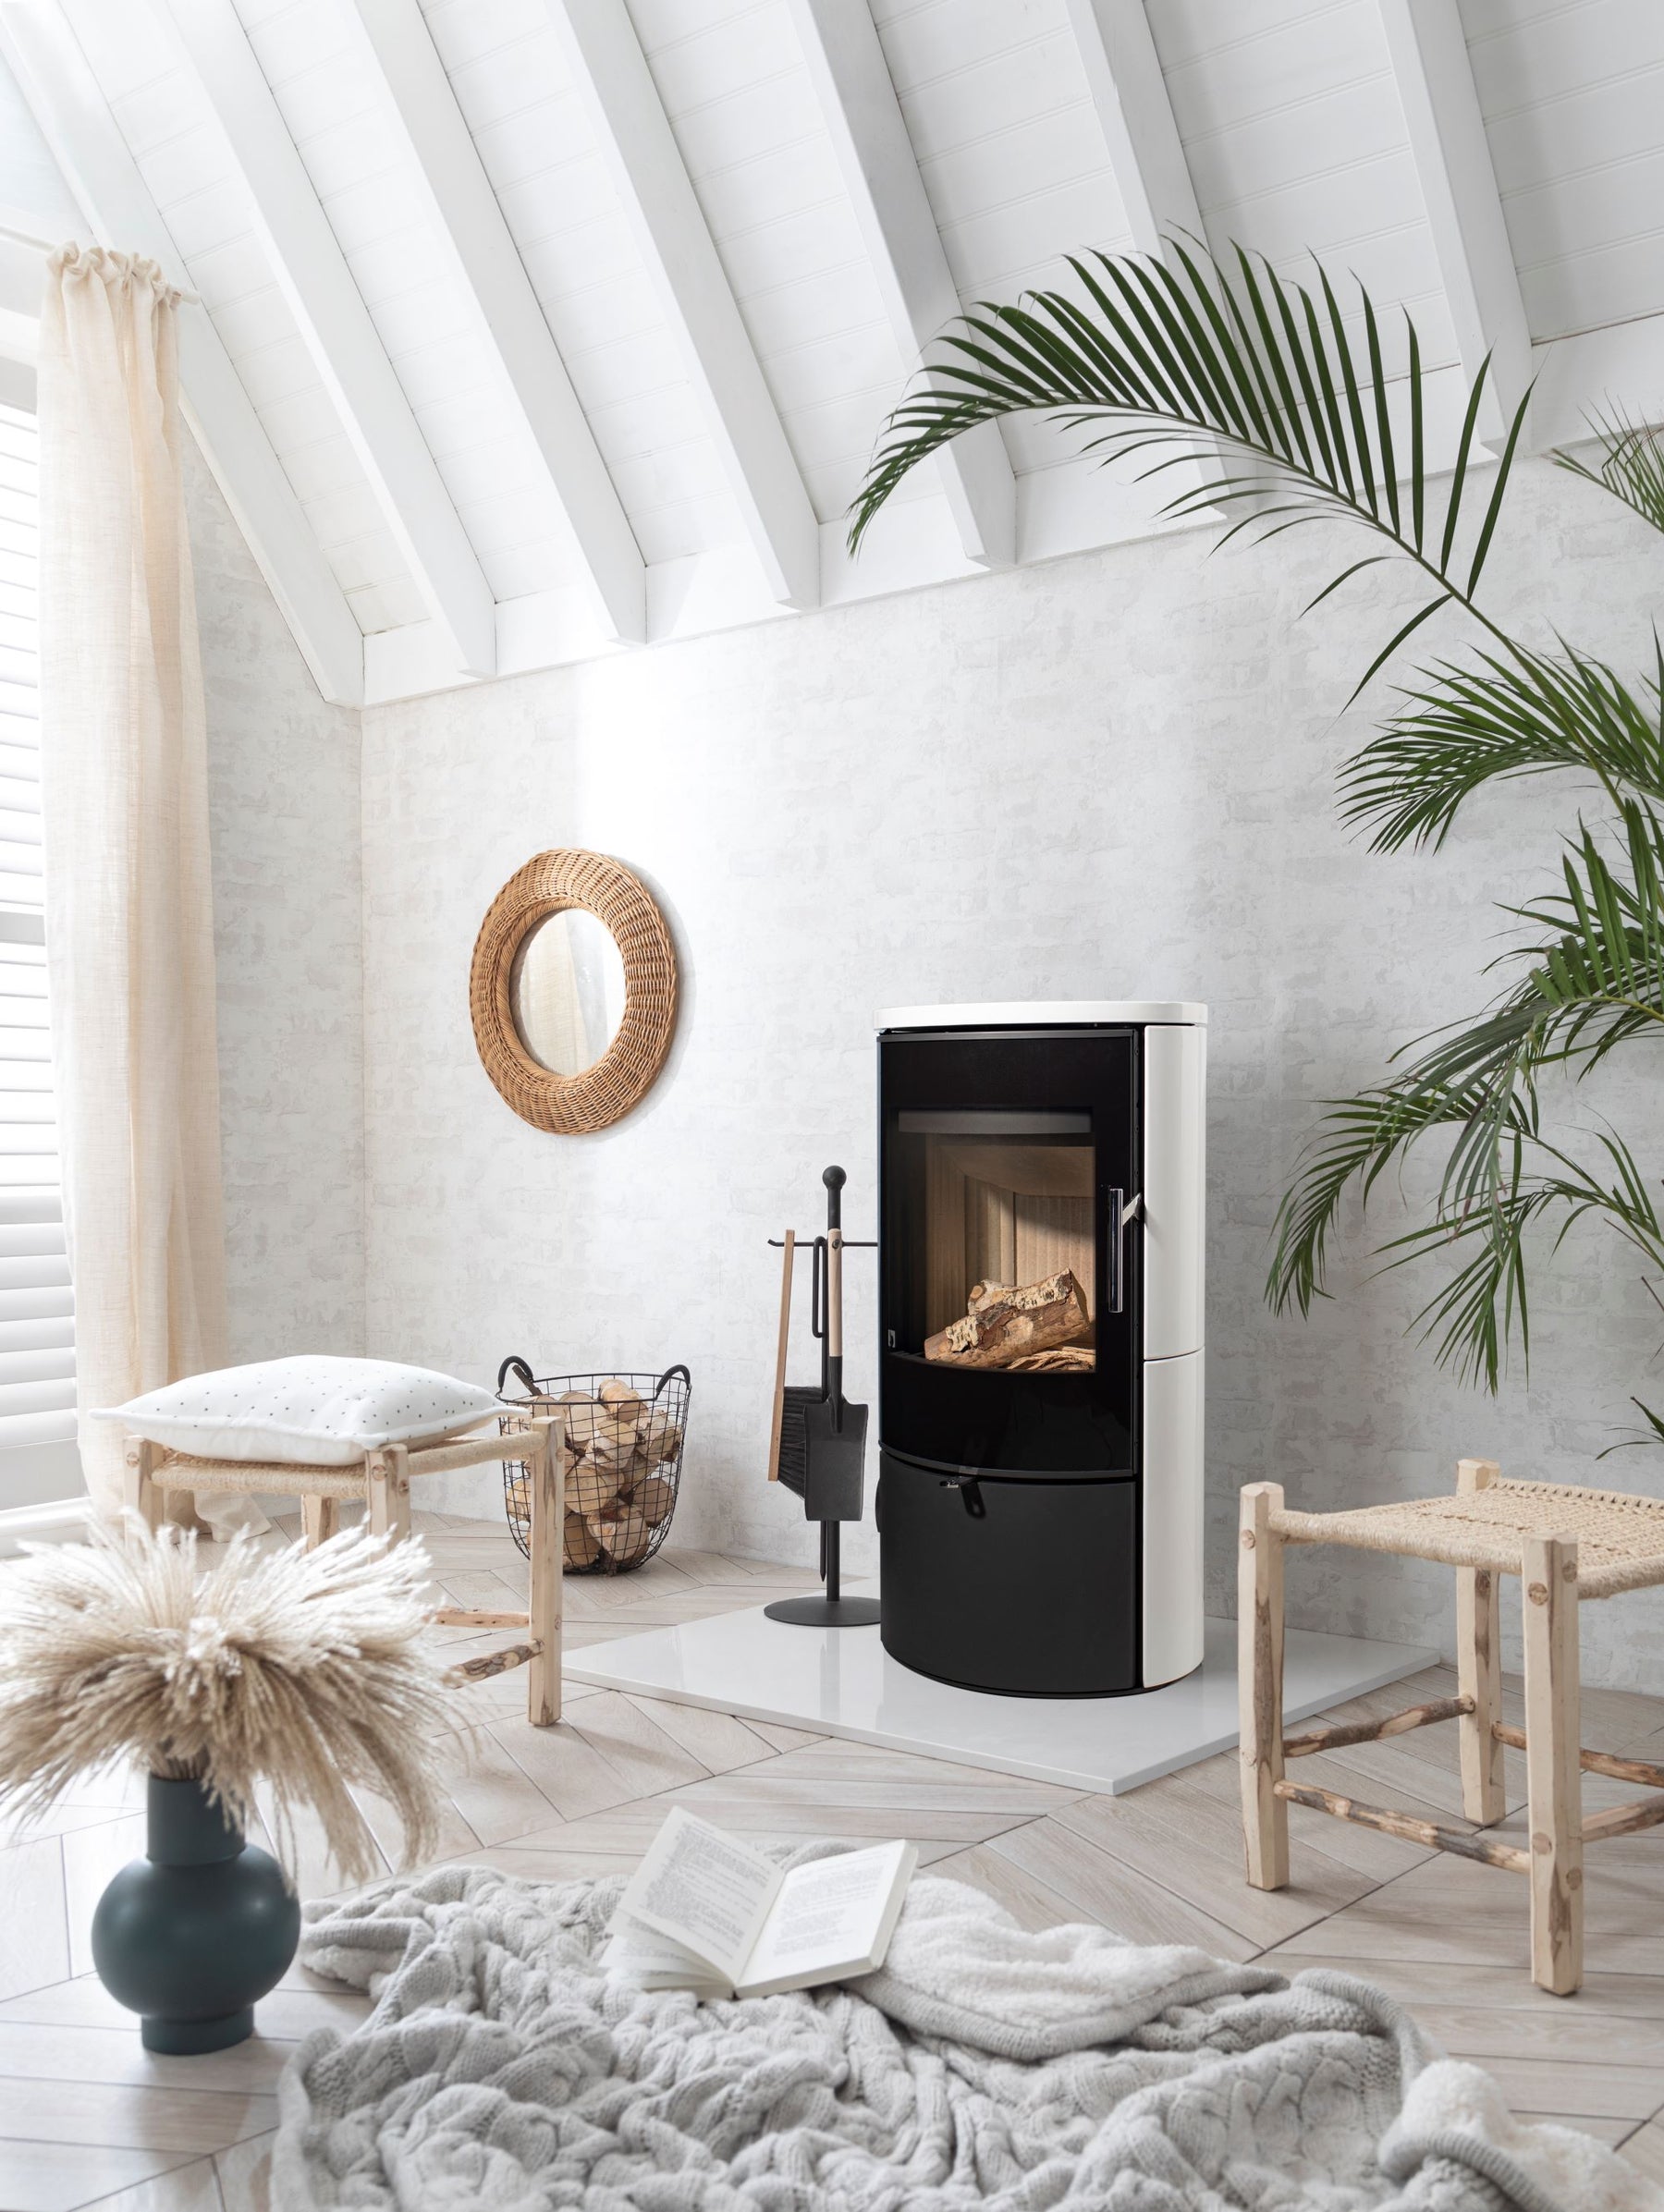 Common Problems with Boiler Stoves and How to Solve Them